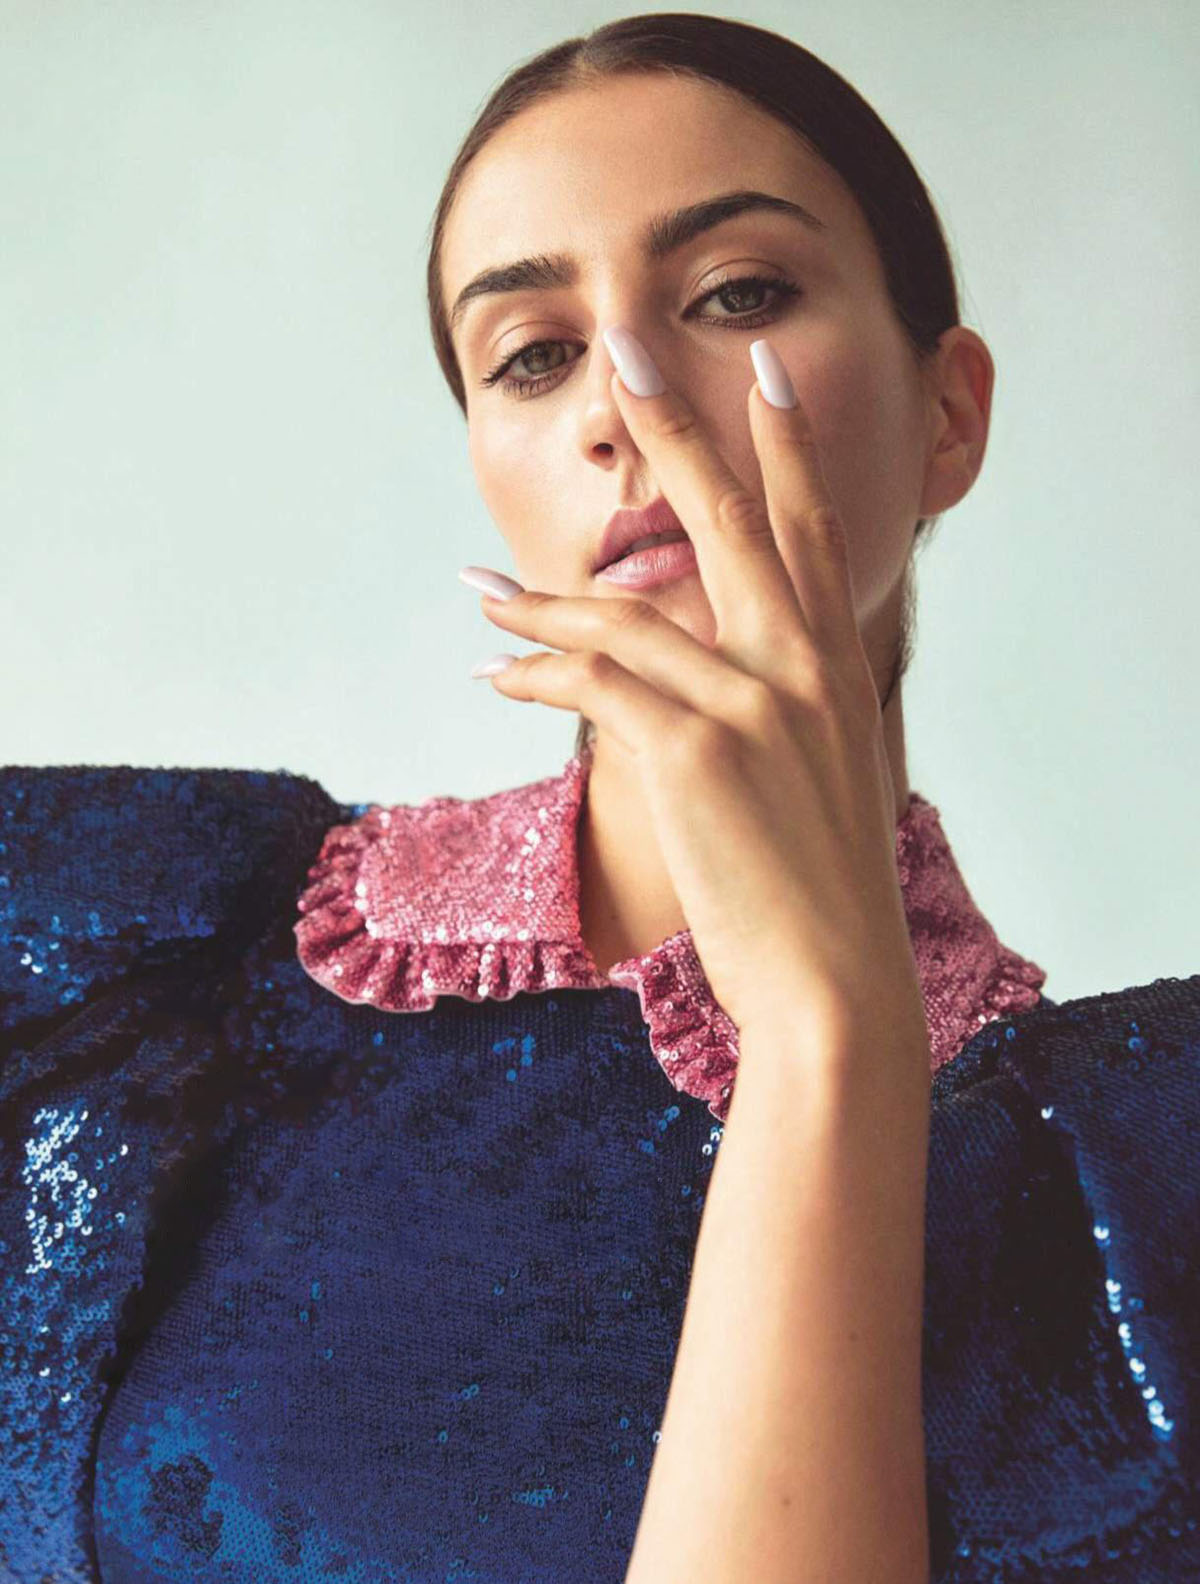 Claudia Salas by Paula Méndez for InStyle Spain July/August 2021